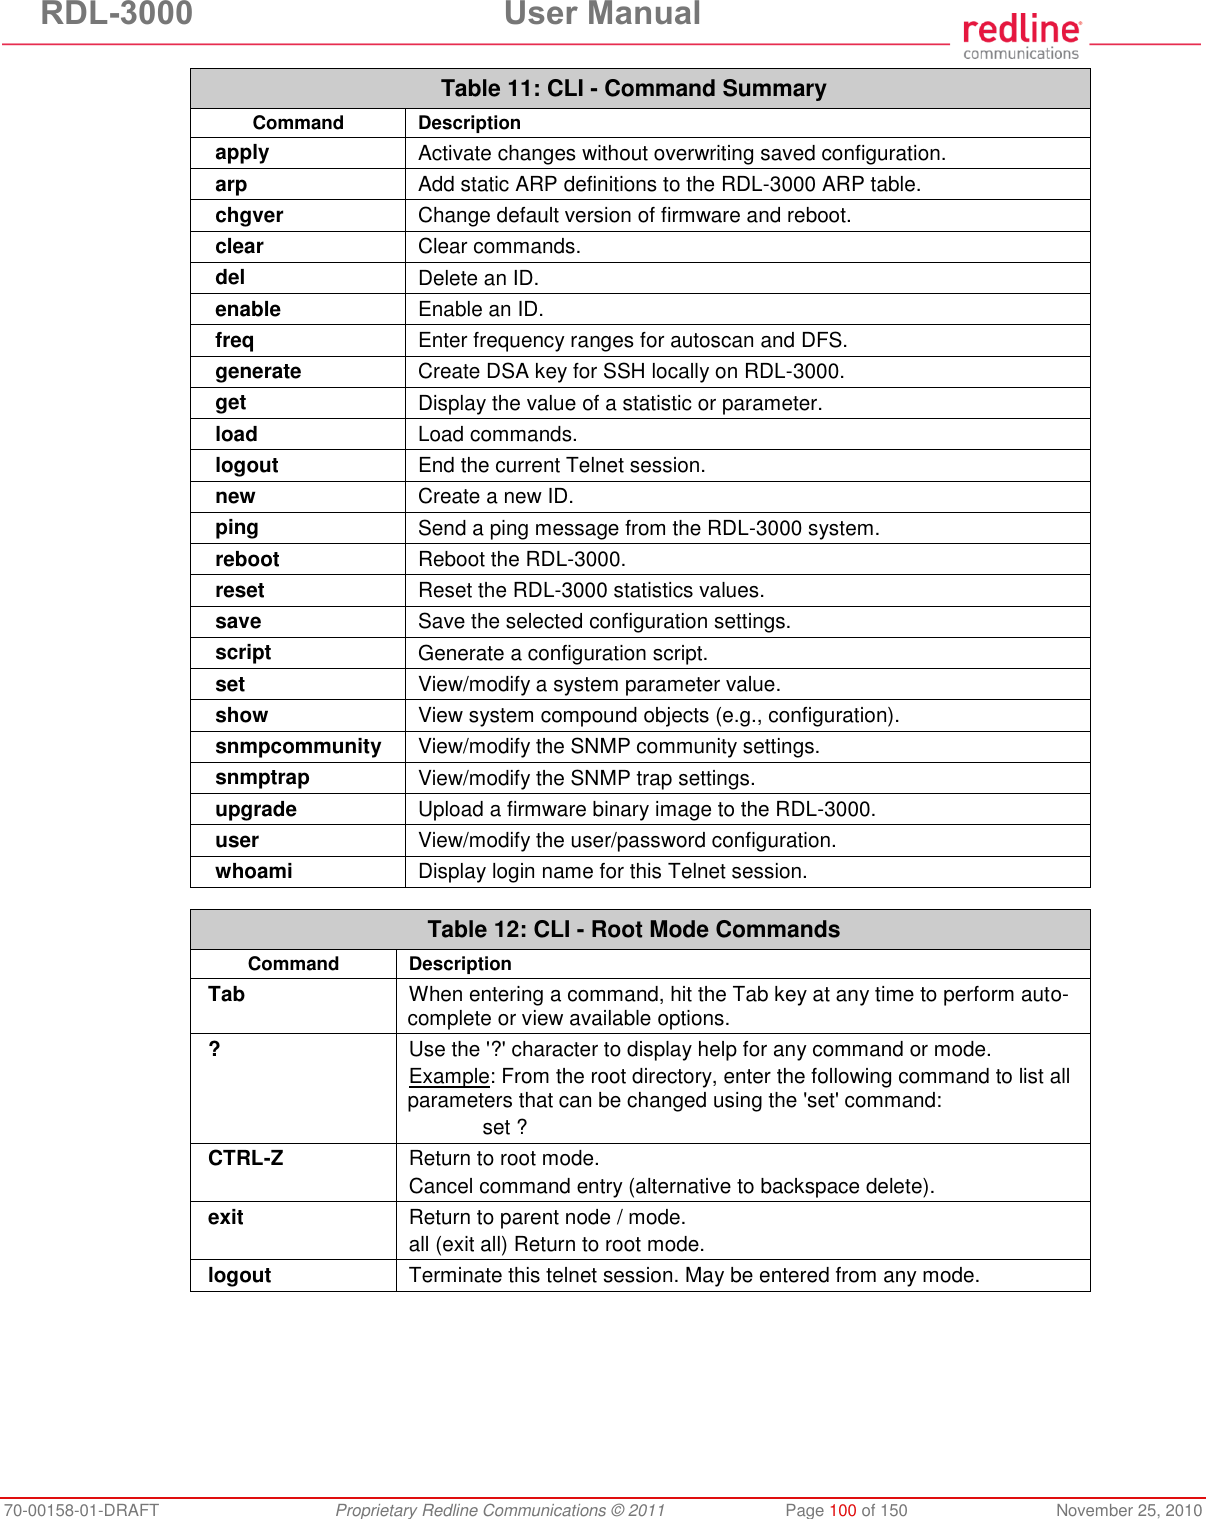 RDL-3000  User Manual 70-00158-01-DRAFT  Proprietary Redline Communications © 2011  Page 100 of 150  November 25, 2010 Table 11: CLI - Command Summary Command Description apply Activate changes without overwriting saved configuration. arp Add static ARP definitions to the RDL-3000 ARP table. chgver Change default version of firmware and reboot. clear Clear commands. del Delete an ID. enable Enable an ID. freq Enter frequency ranges for autoscan and DFS. generate Create DSA key for SSH locally on RDL-3000. get Display the value of a statistic or parameter.  load Load commands. logout End the current Telnet session. new Create a new ID. ping Send a ping message from the RDL-3000 system. reboot Reboot the RDL-3000. reset Reset the RDL-3000 statistics values. save Save the selected configuration settings. script Generate a configuration script. set View/modify a system parameter value. show View system compound objects (e.g., configuration). snmpcommunity View/modify the SNMP community settings. snmptrap View/modify the SNMP trap settings. upgrade Upload a firmware binary image to the RDL-3000. user View/modify the user/password configuration. whoami Display login name for this Telnet session.   Table 12: CLI - Root Mode Commands Command Description Tab When entering a command, hit the Tab key at any time to perform auto-complete or view available options. ? Use the &apos;?&apos; character to display help for any command or mode. Example: From the root directory, enter the following command to list all parameters that can be changed using the &apos;set&apos; command:   set ? CTRL-Z Return to root mode. Cancel command entry (alternative to backspace delete). exit  Return to parent node / mode. all (exit all) Return to root mode. logout Terminate this telnet session. May be entered from any mode.   